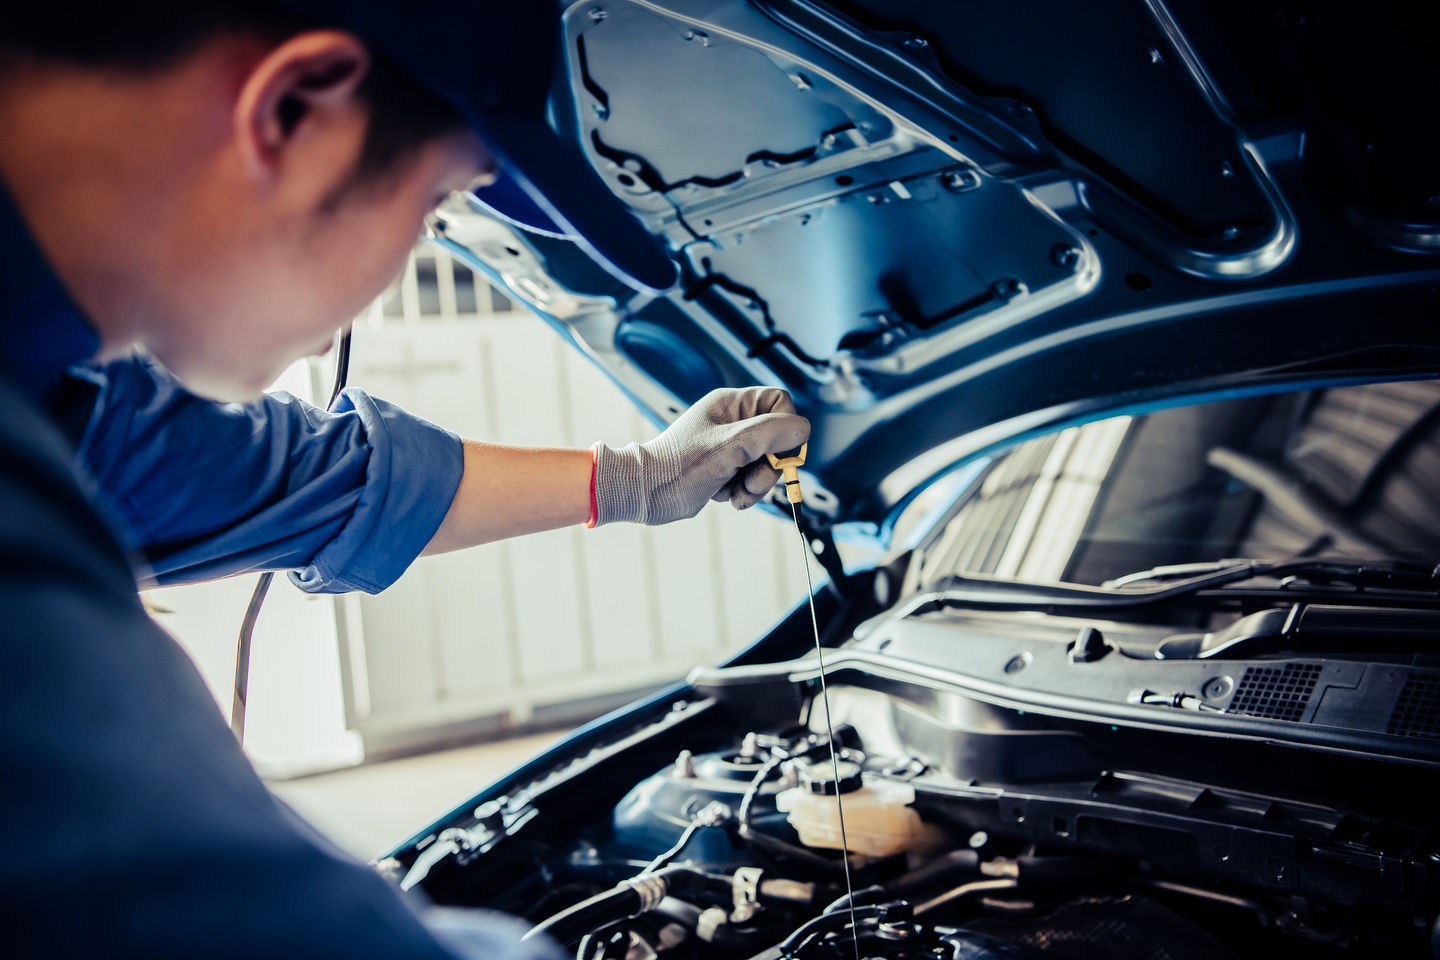 Three tips to make sure your vehicle will remain reliable this summer